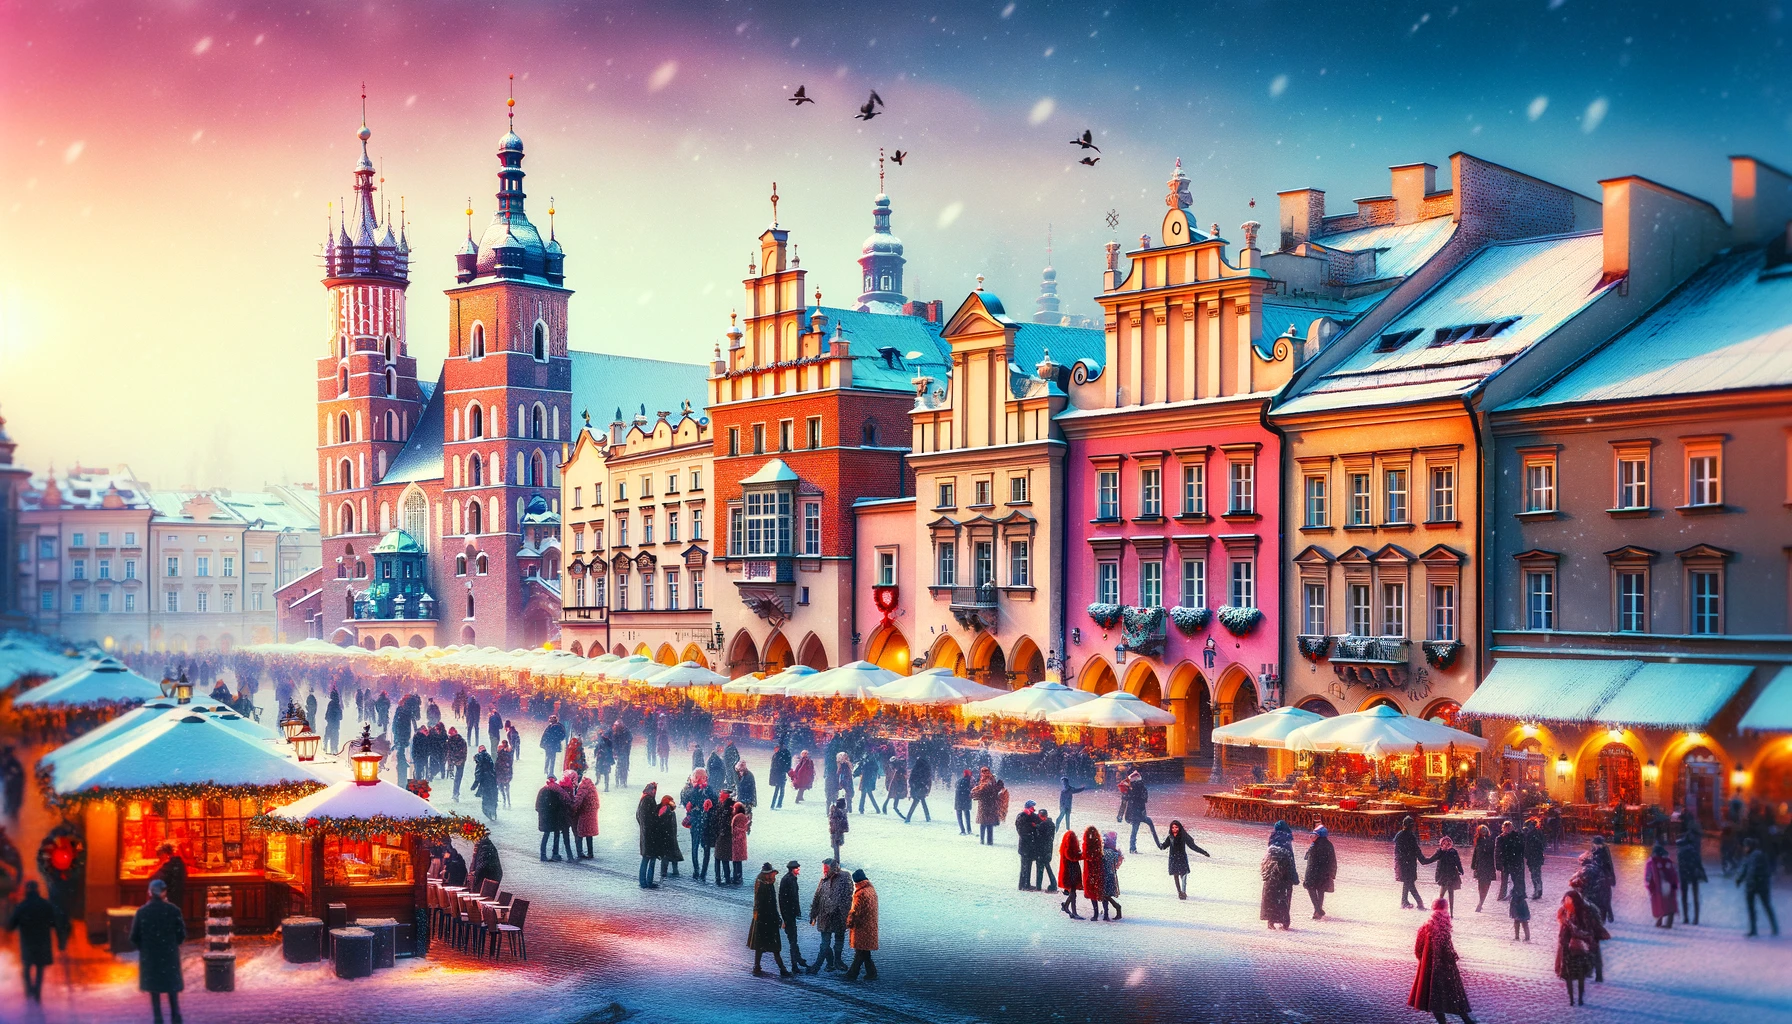 Winter view of Main Market Square in Krakow with historic townhouses and lively atmosphere